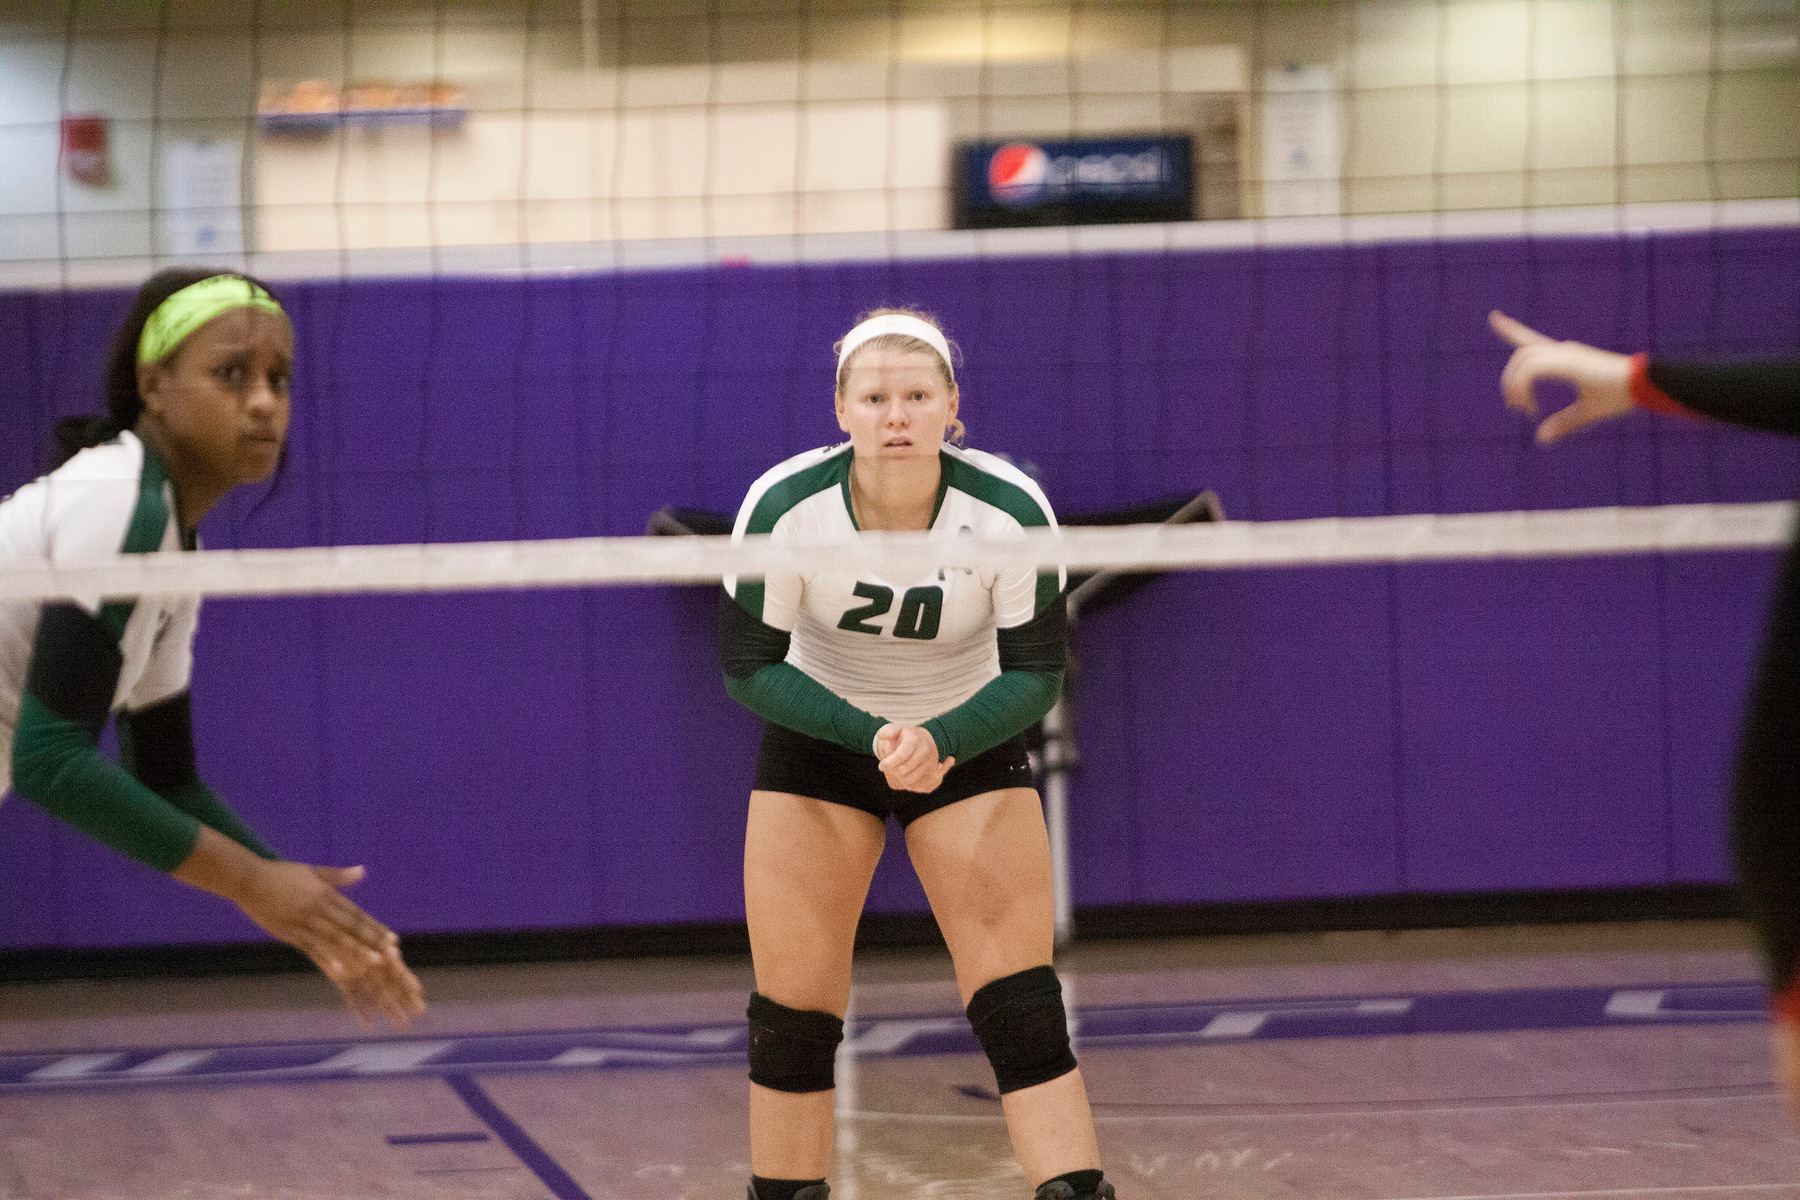 Parker Reaches 2,000 Career Dig Milestone as Bethany Sweeps Thiel